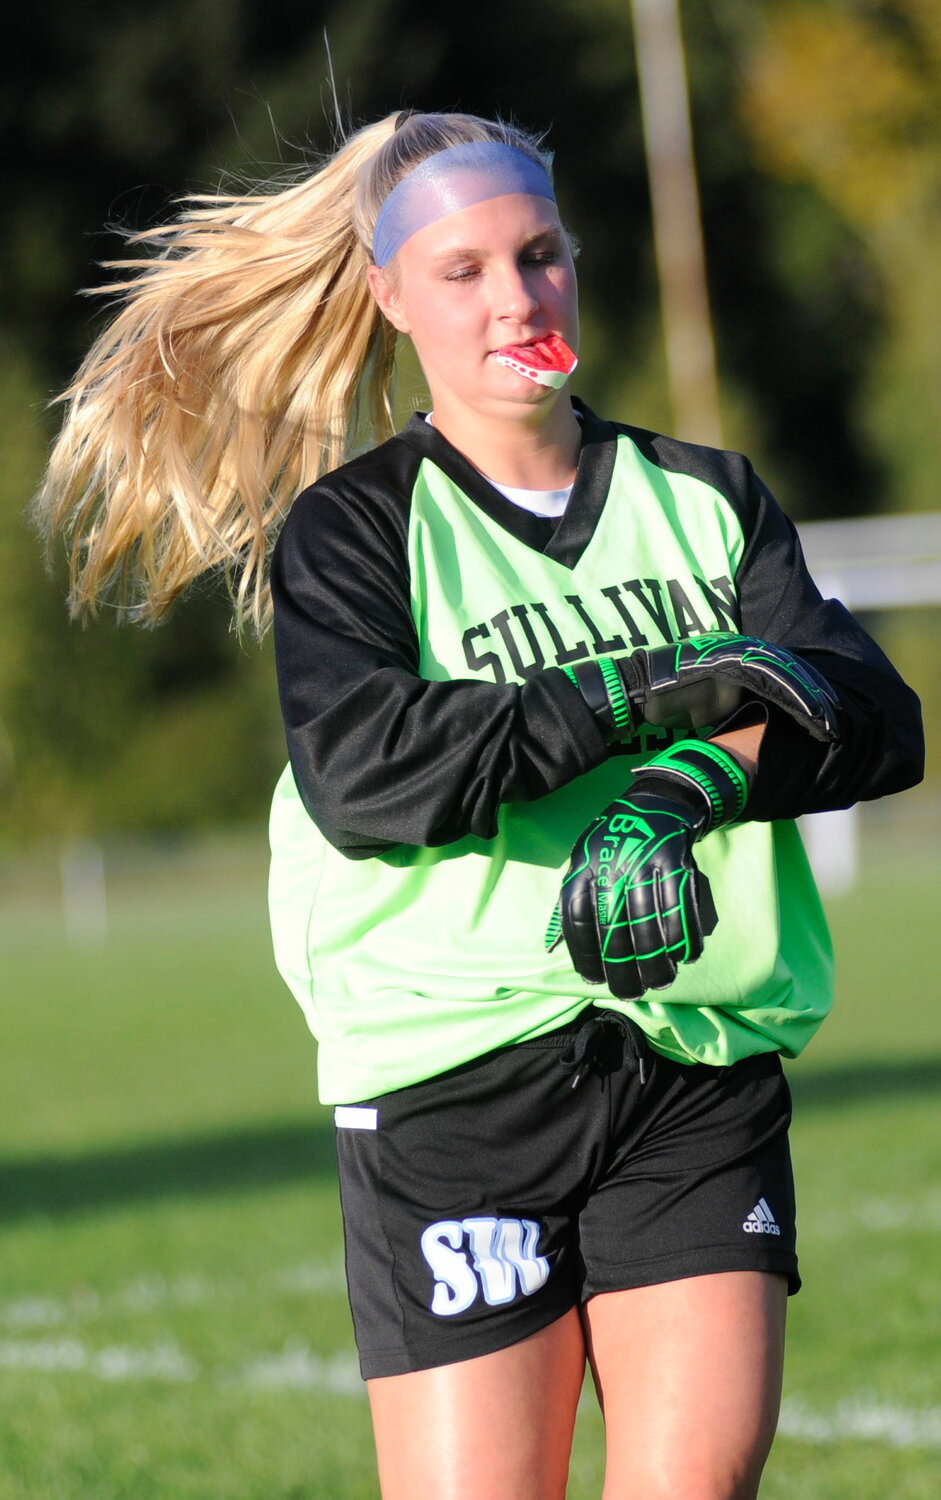 Home team goalie. The Lady Bulldogs’ keeper made 18 saves on 30 shots on goal...